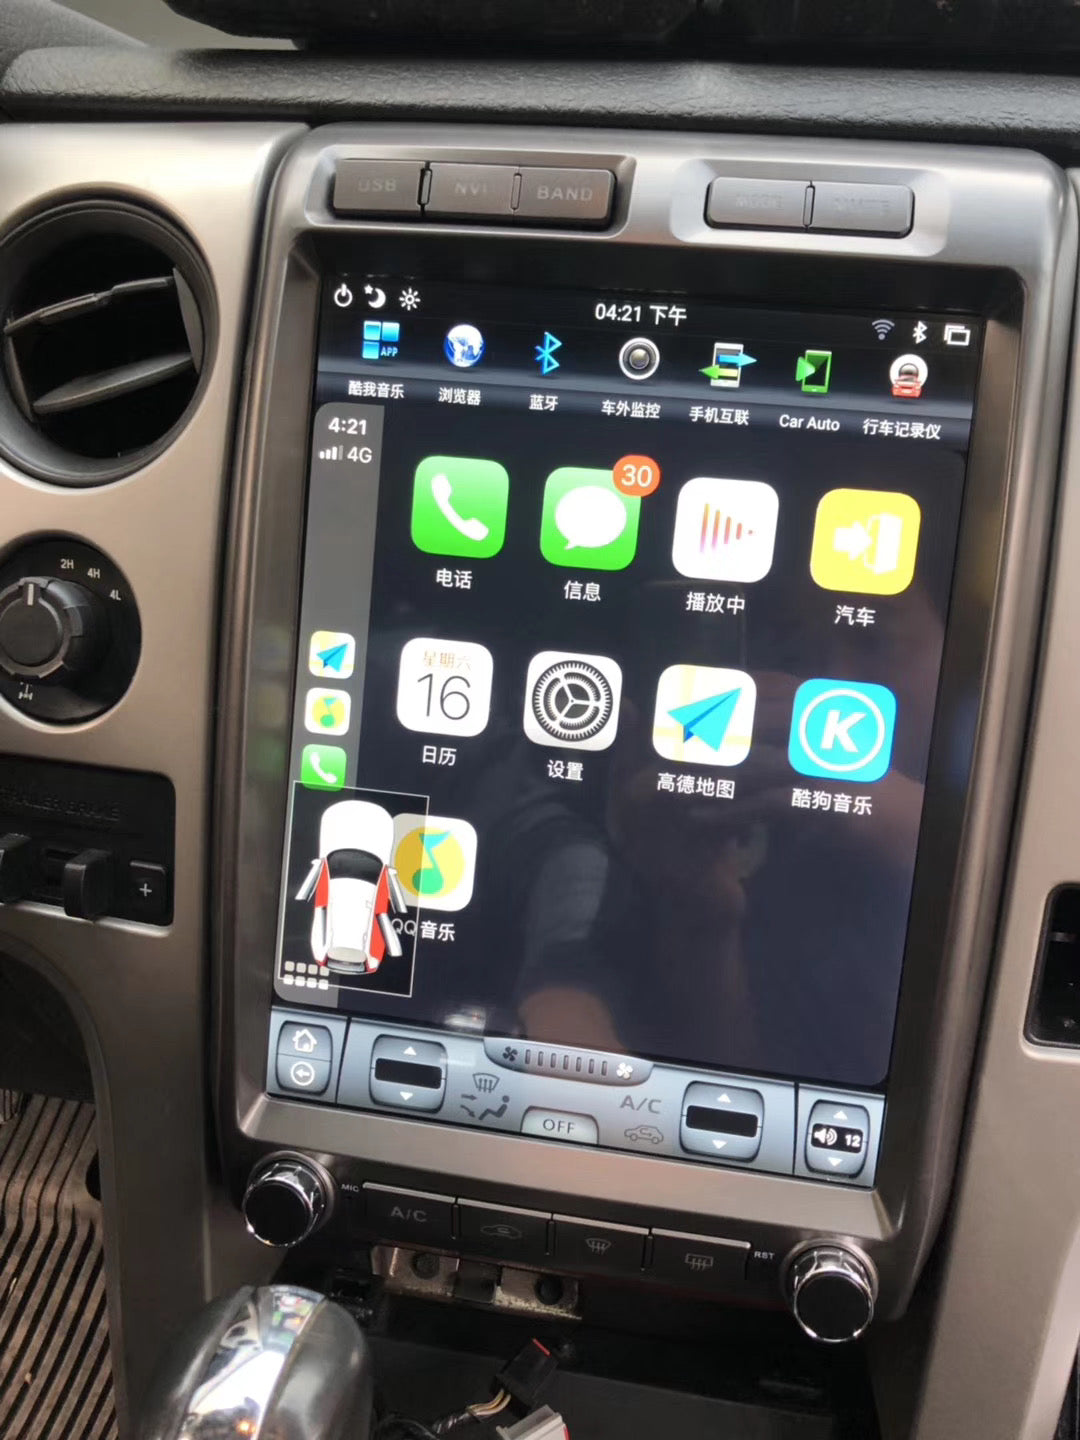 Ford F-150 2009 - 2014 13" Vertical Screen Android Radio